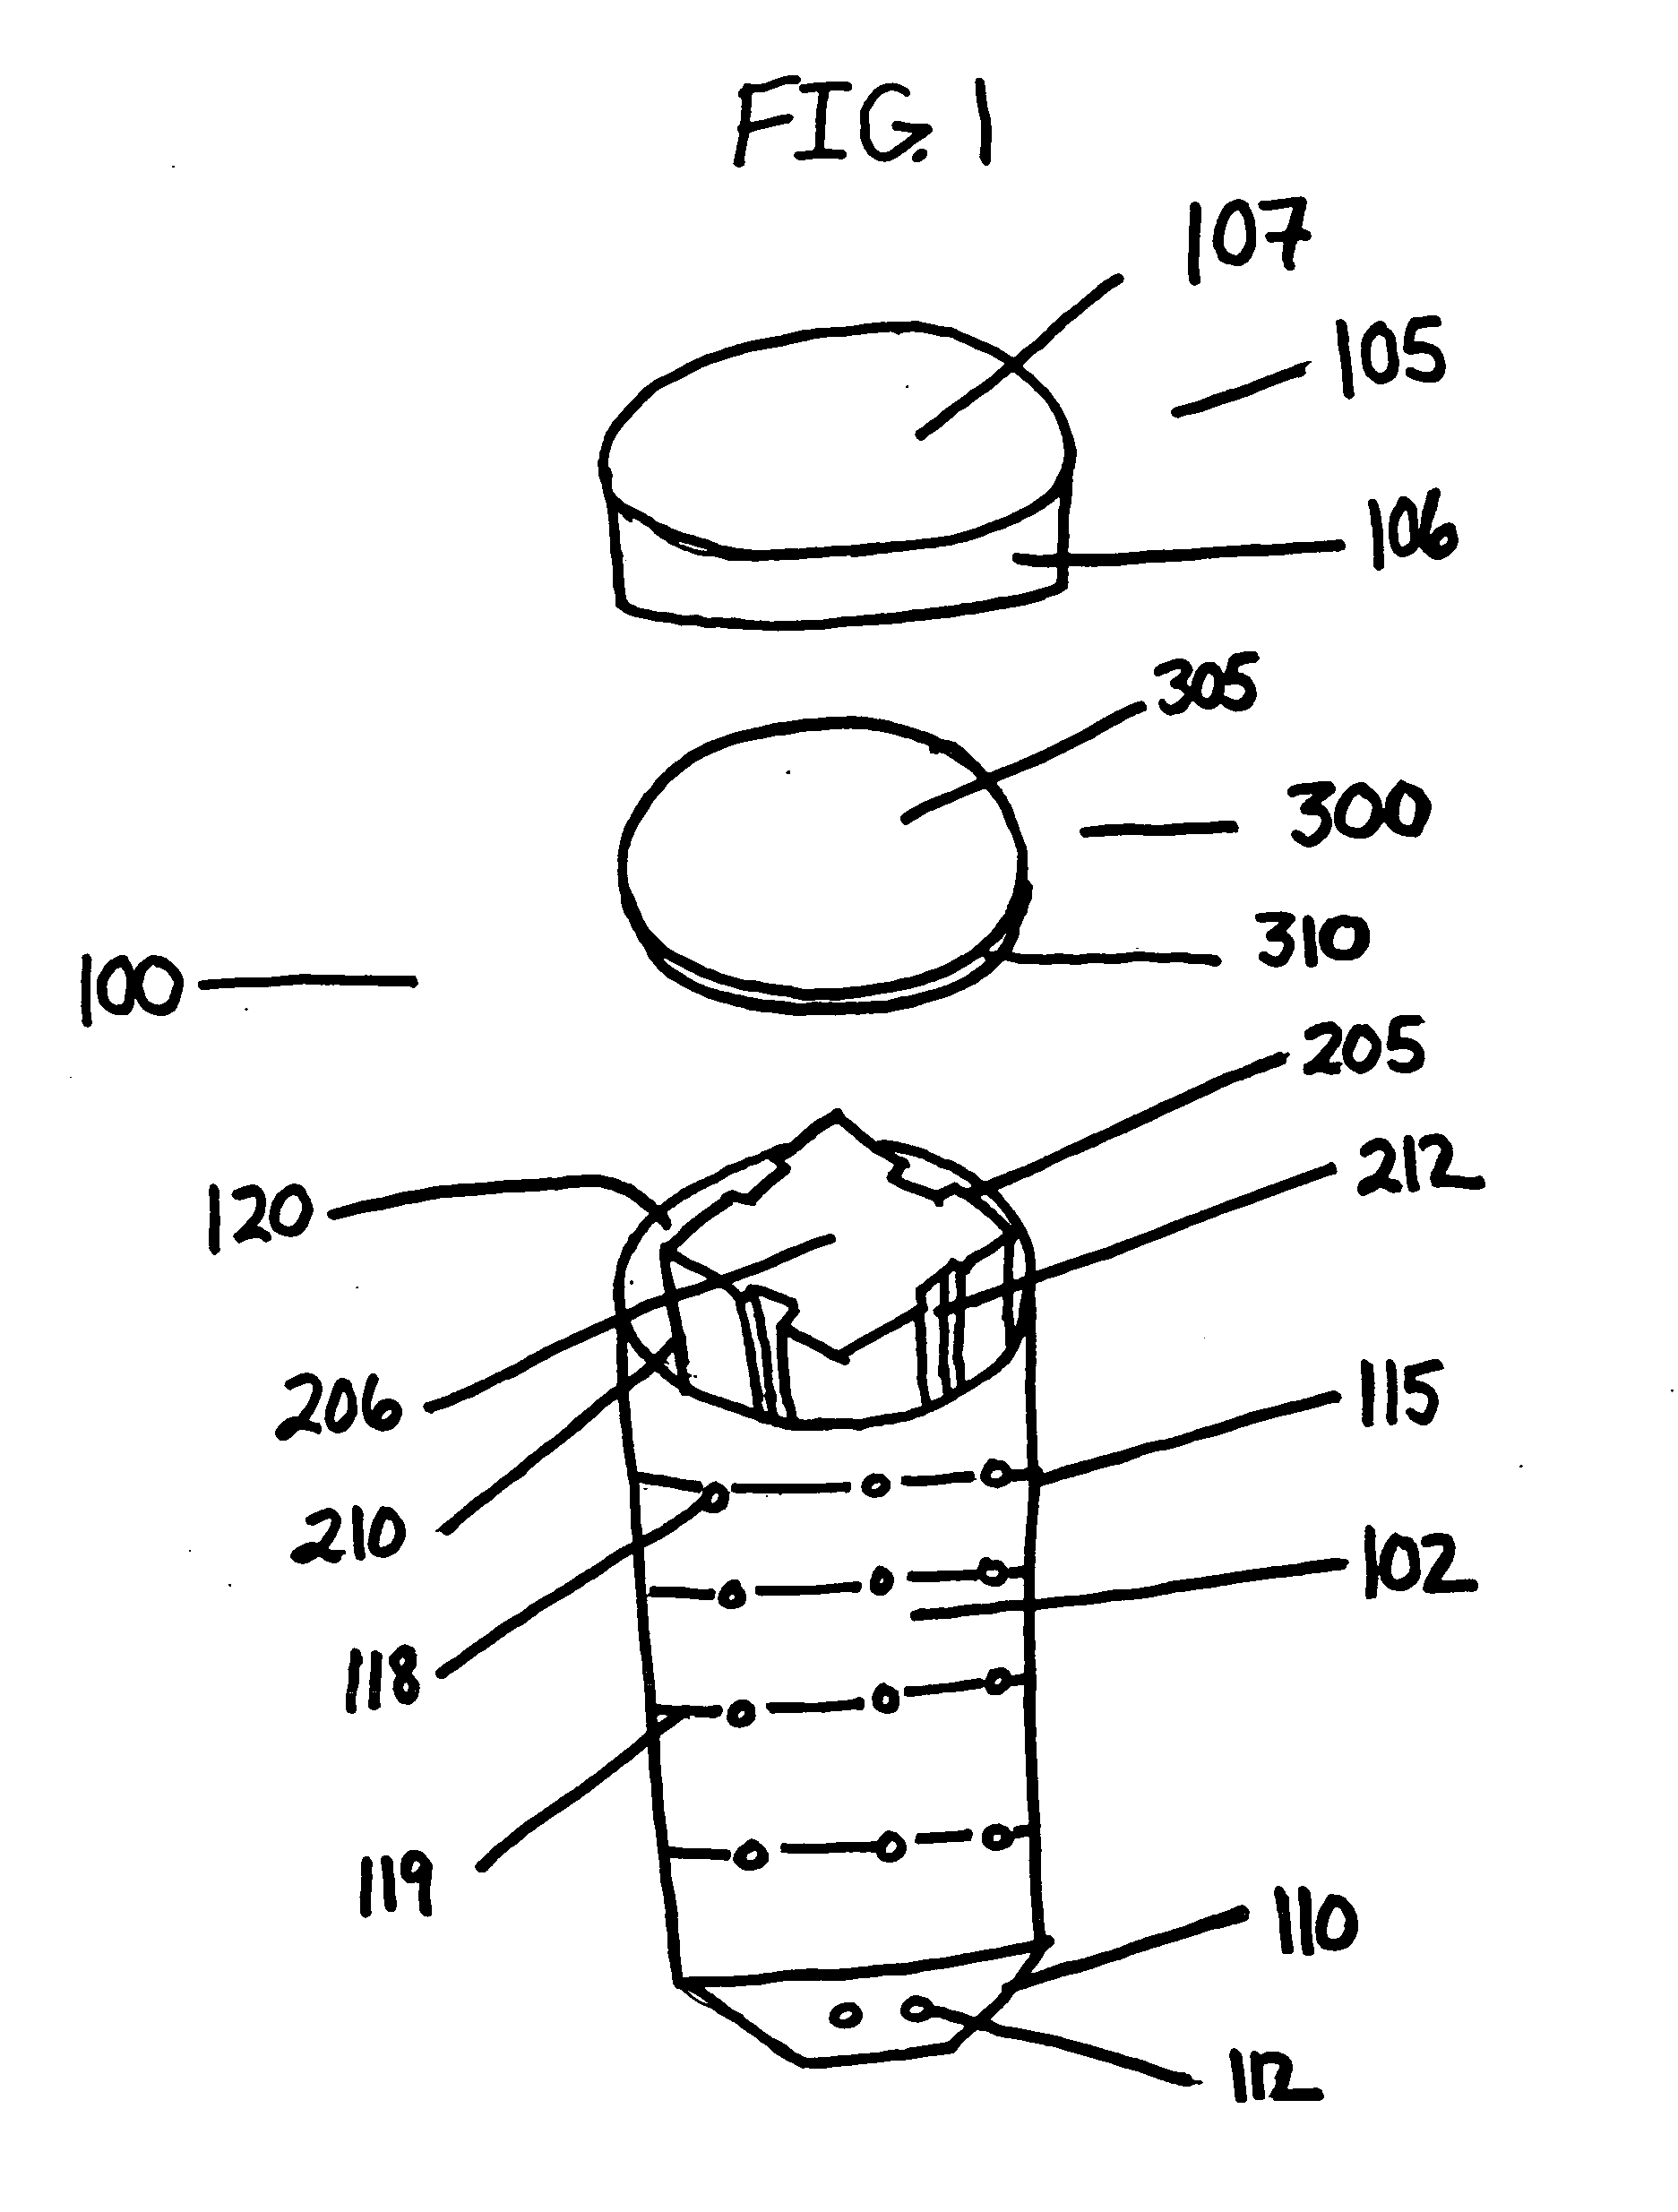 Devices and methods for monitoring and/or controlling arthropods